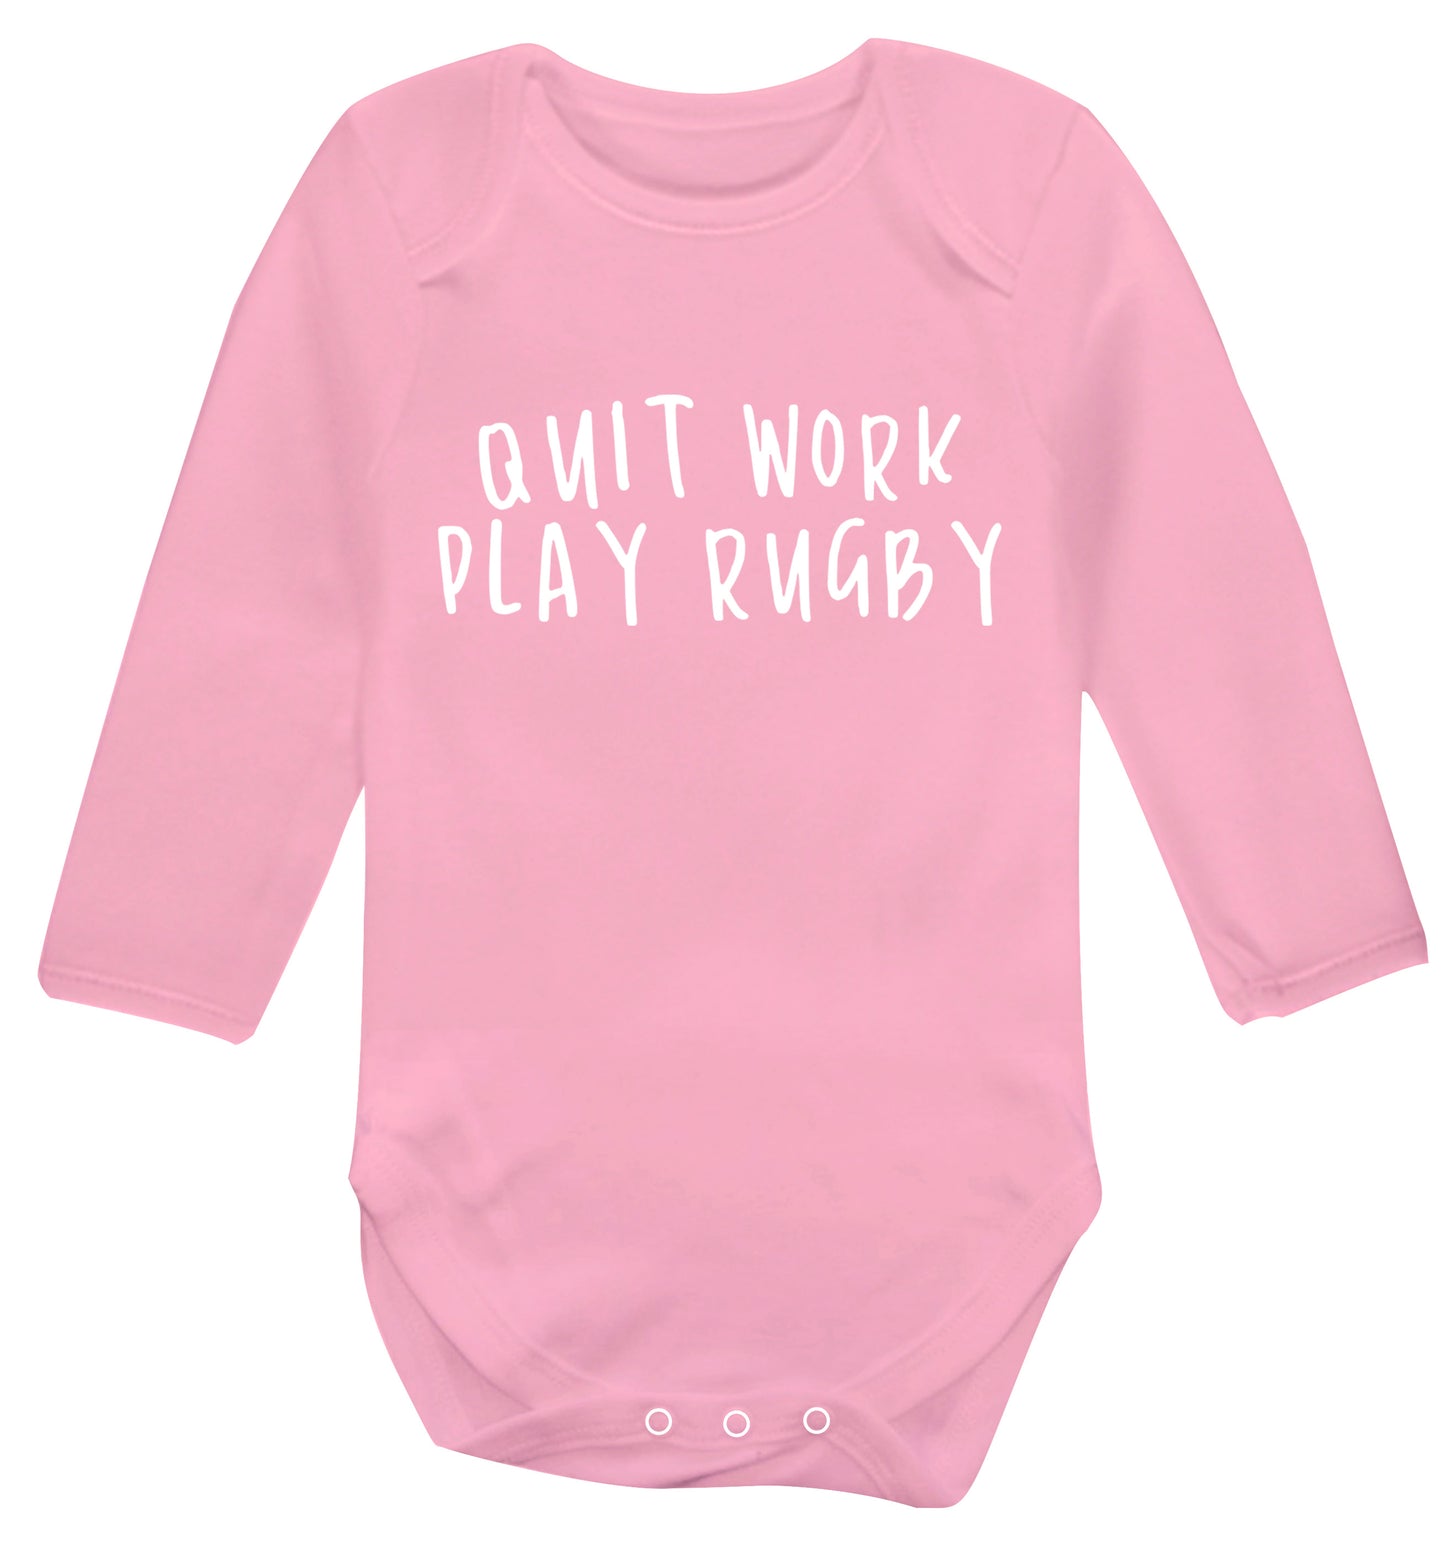 Quit work play rugby Baby Vest long sleeved pale pink 6-12 months